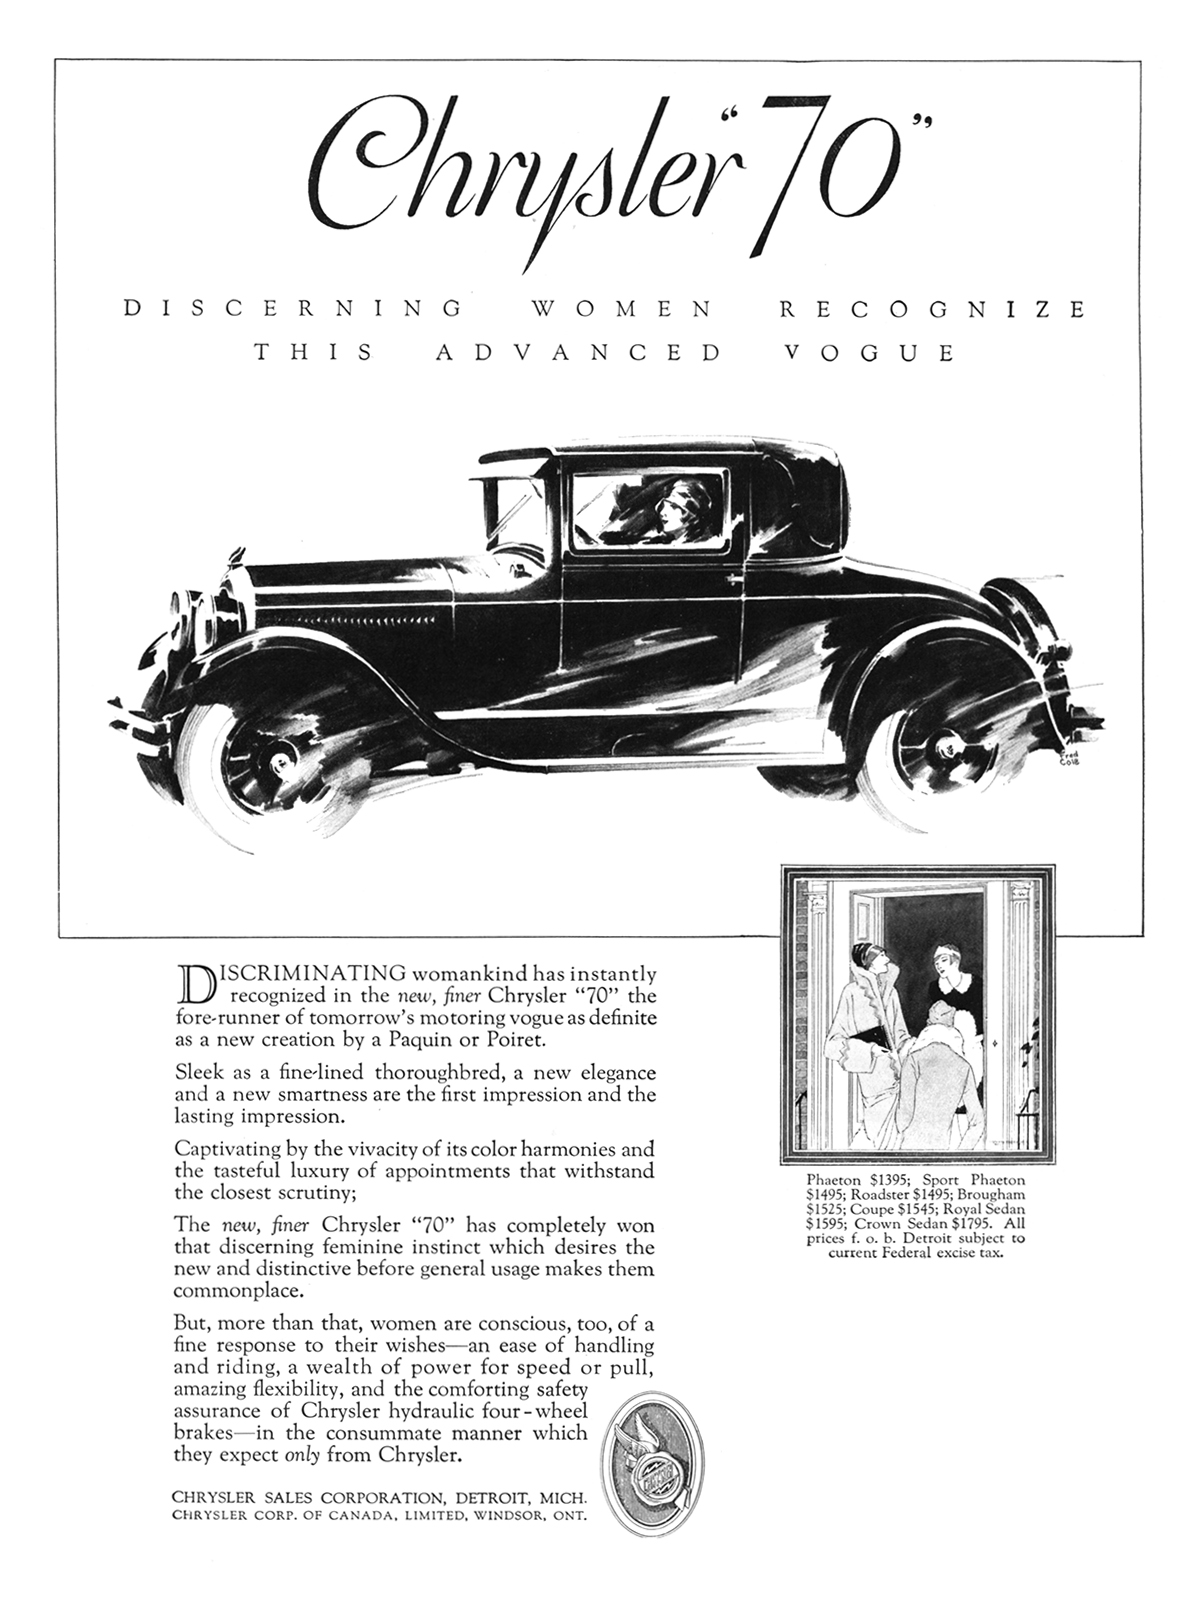 Chrysler "70" Ad (January, 1927) - Illustrated by Fred Cole and Edwin Dahlberg